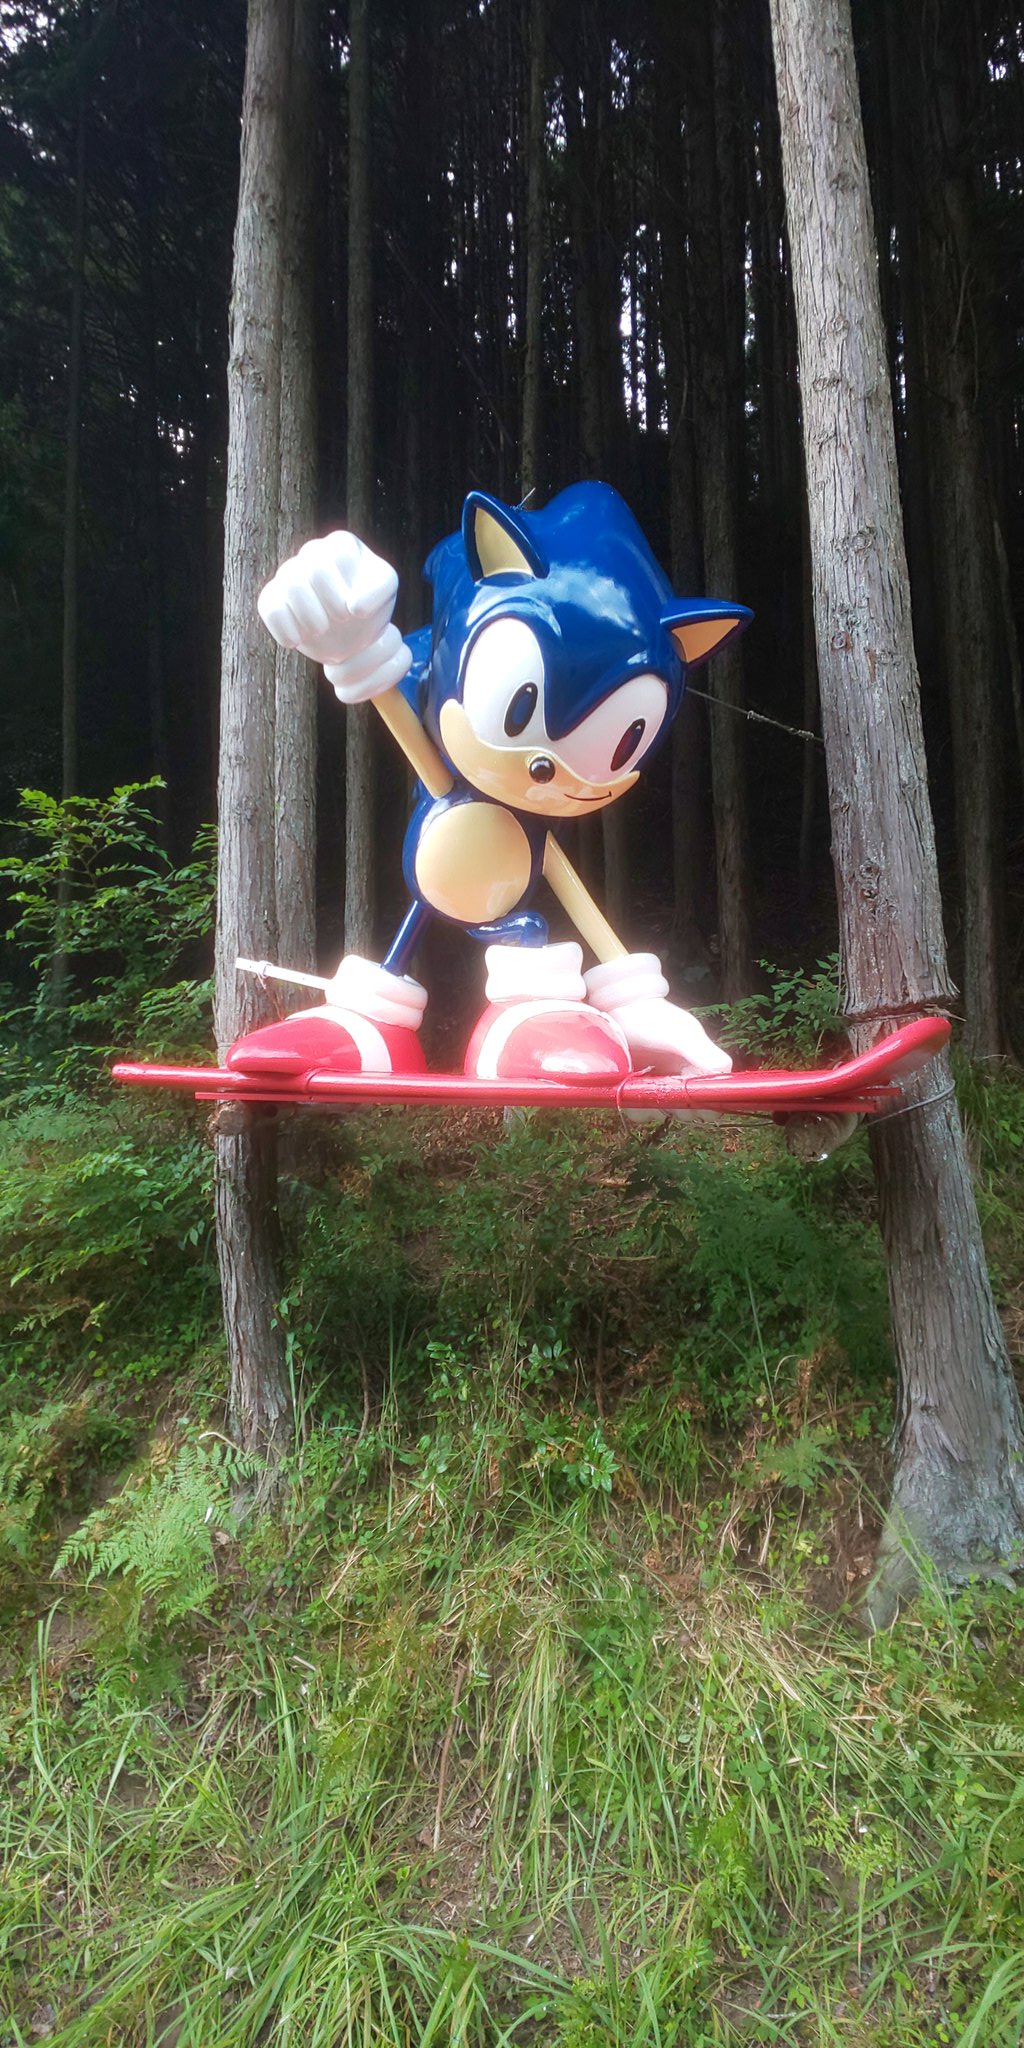 Treasured by fans, Sonic statue in Japanese woods gets restored - Tails'  Channel